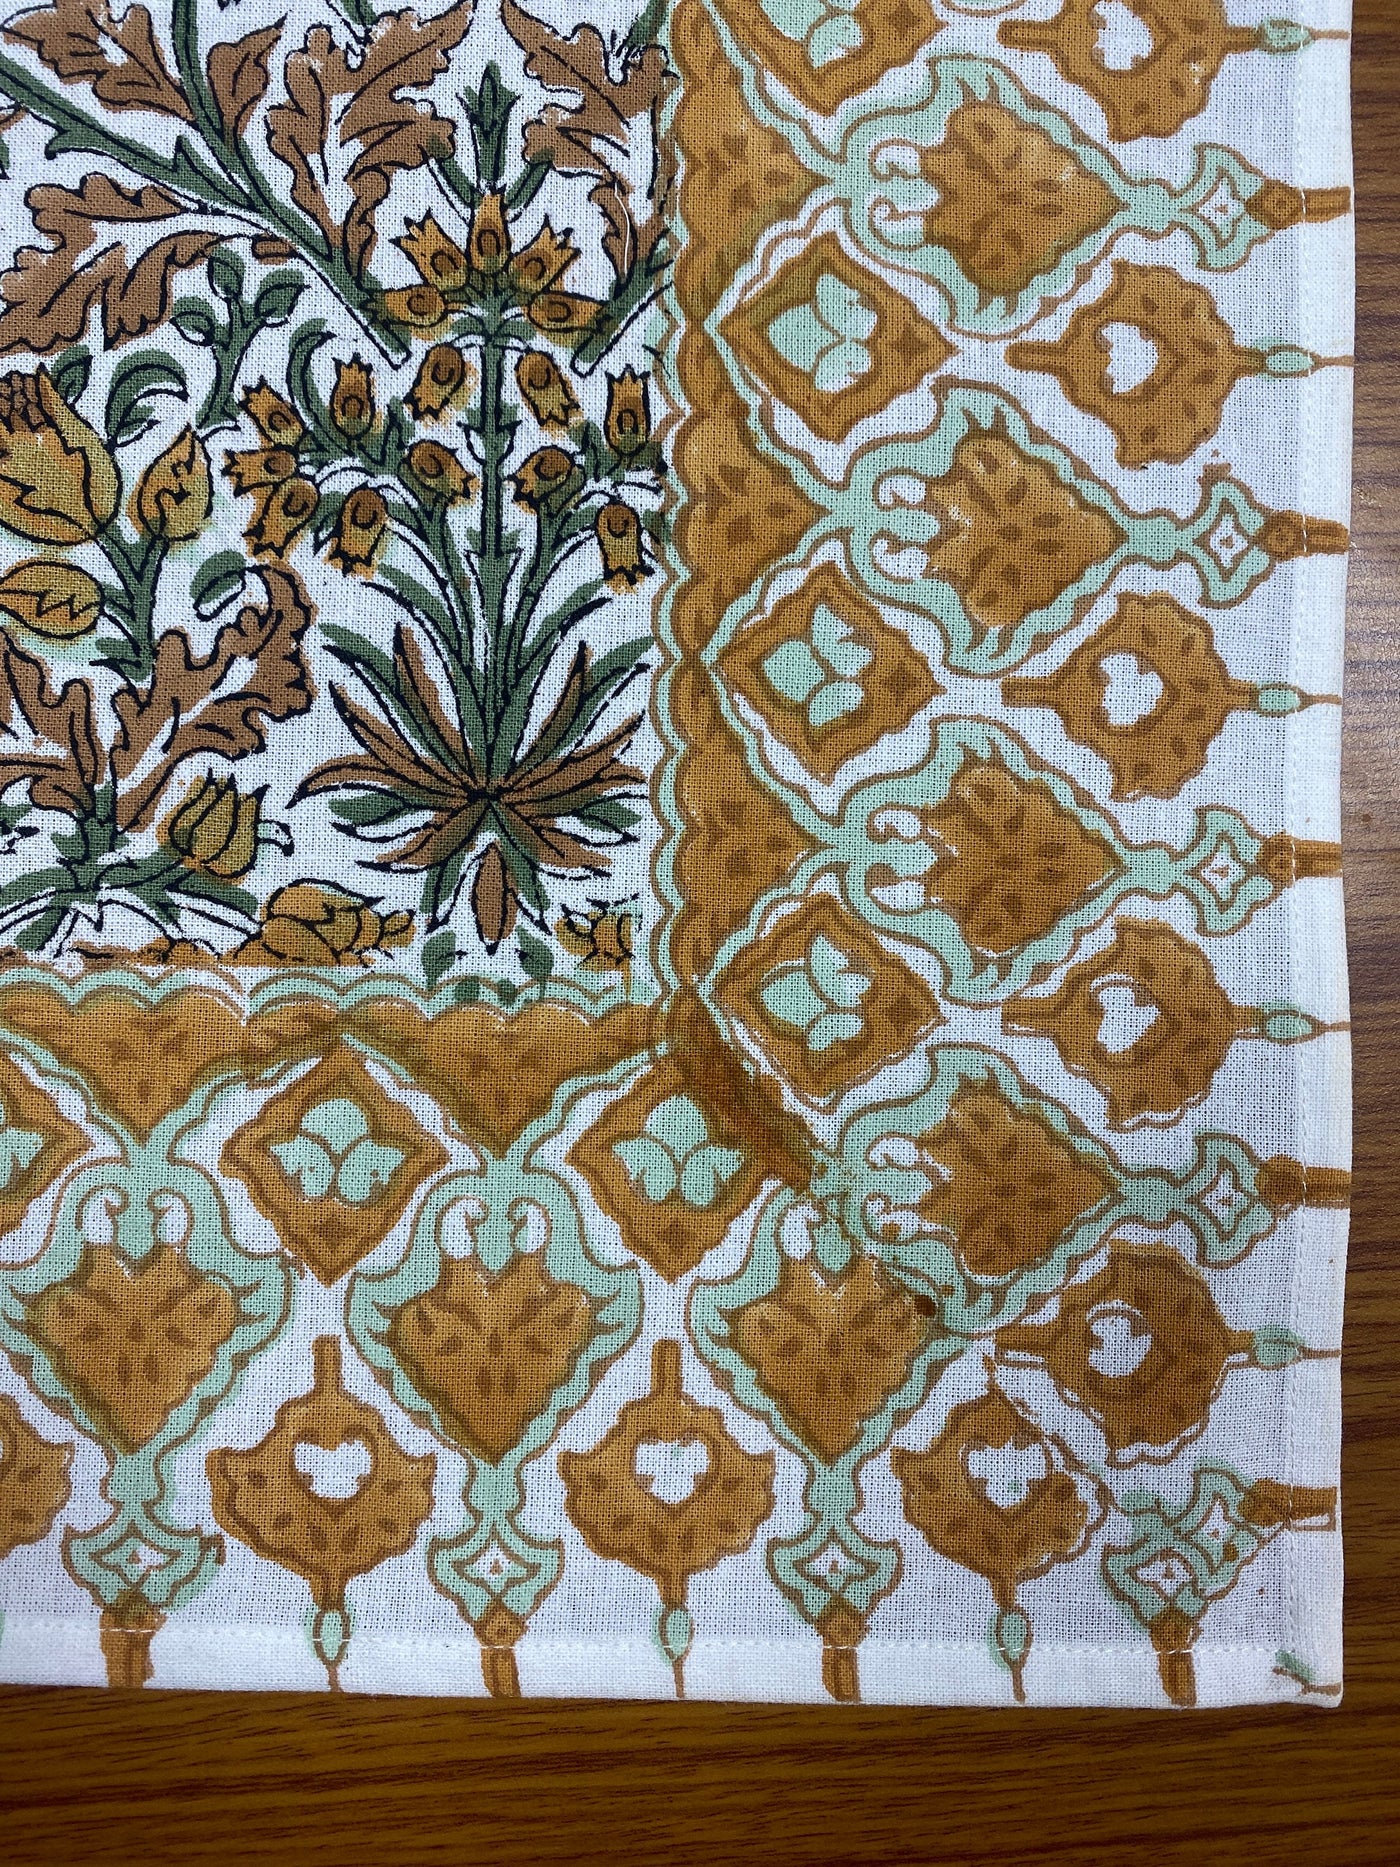 Goldenrod Yellow, Fern Green, Brown Indian Floral Hand Block Printed Cotton Cloth Napkins Size 20x20" Set of 4,6,12,24,48 Wedding Home Gifts